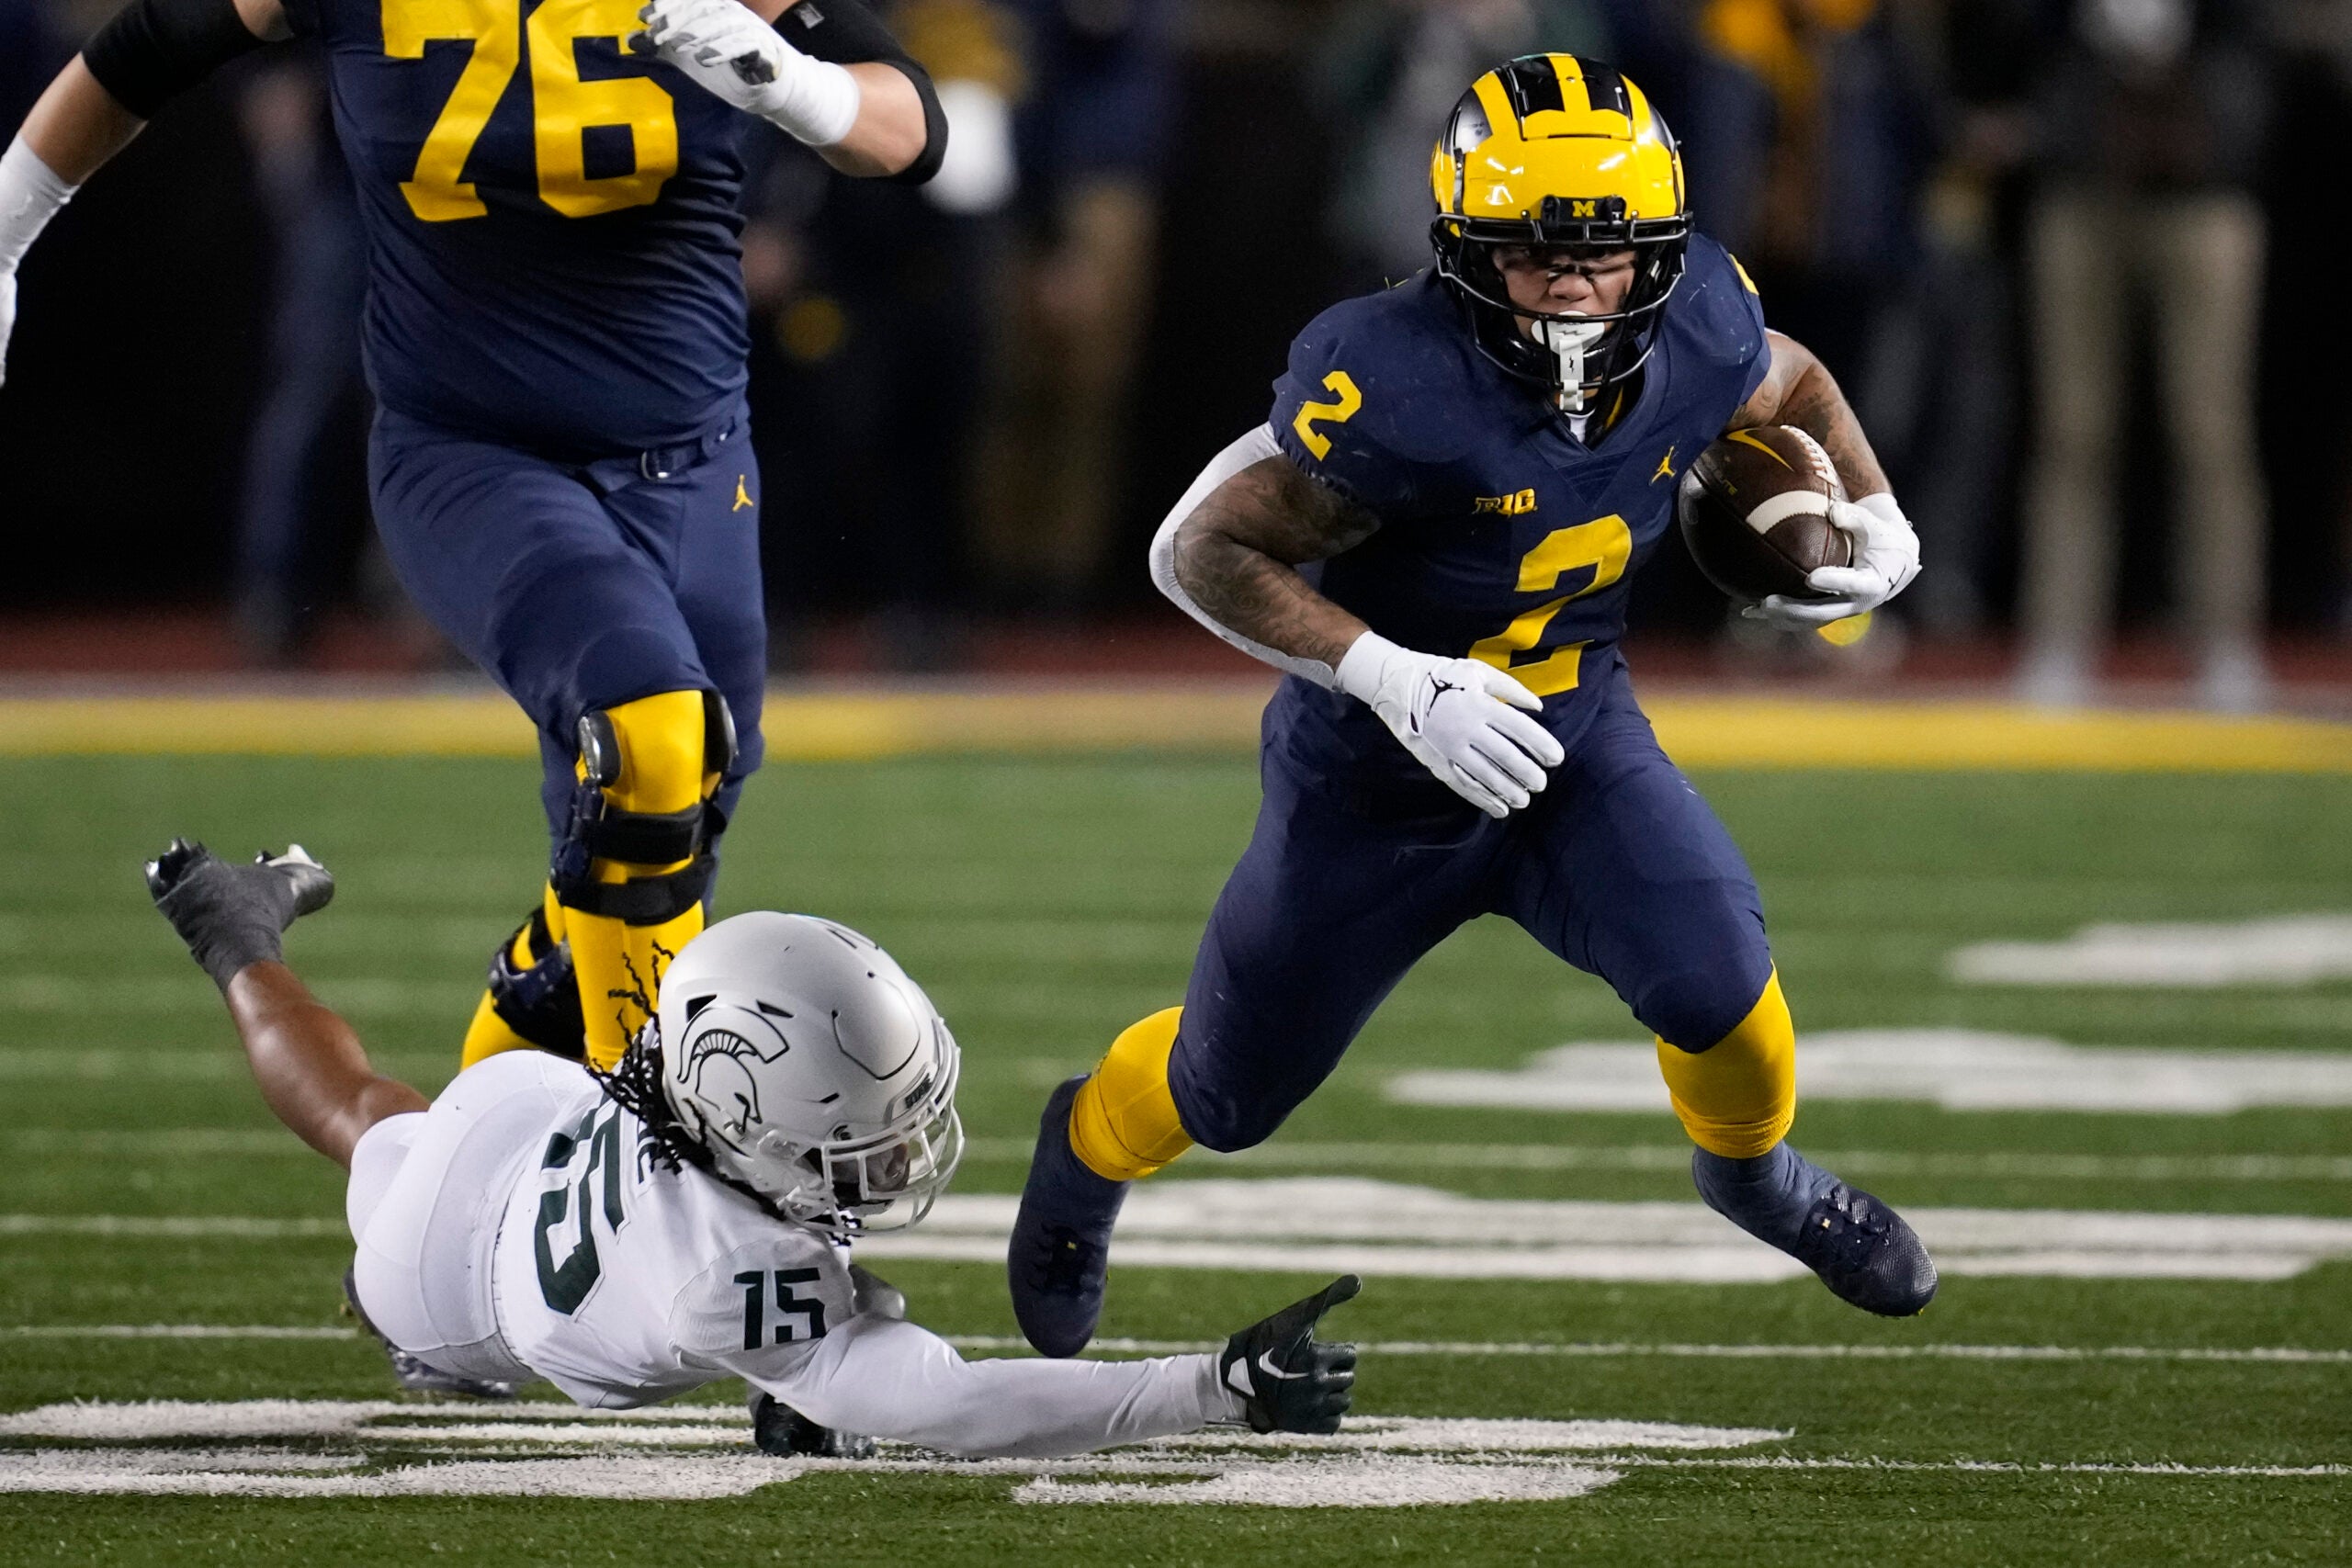 Michigan running back Blake Corum (2) escapes Michigan State safety Angelo Grose (15) in the first half of an NCAA college football game in Ann Arbor, Mich., Saturday, Oct. 29, 2022.